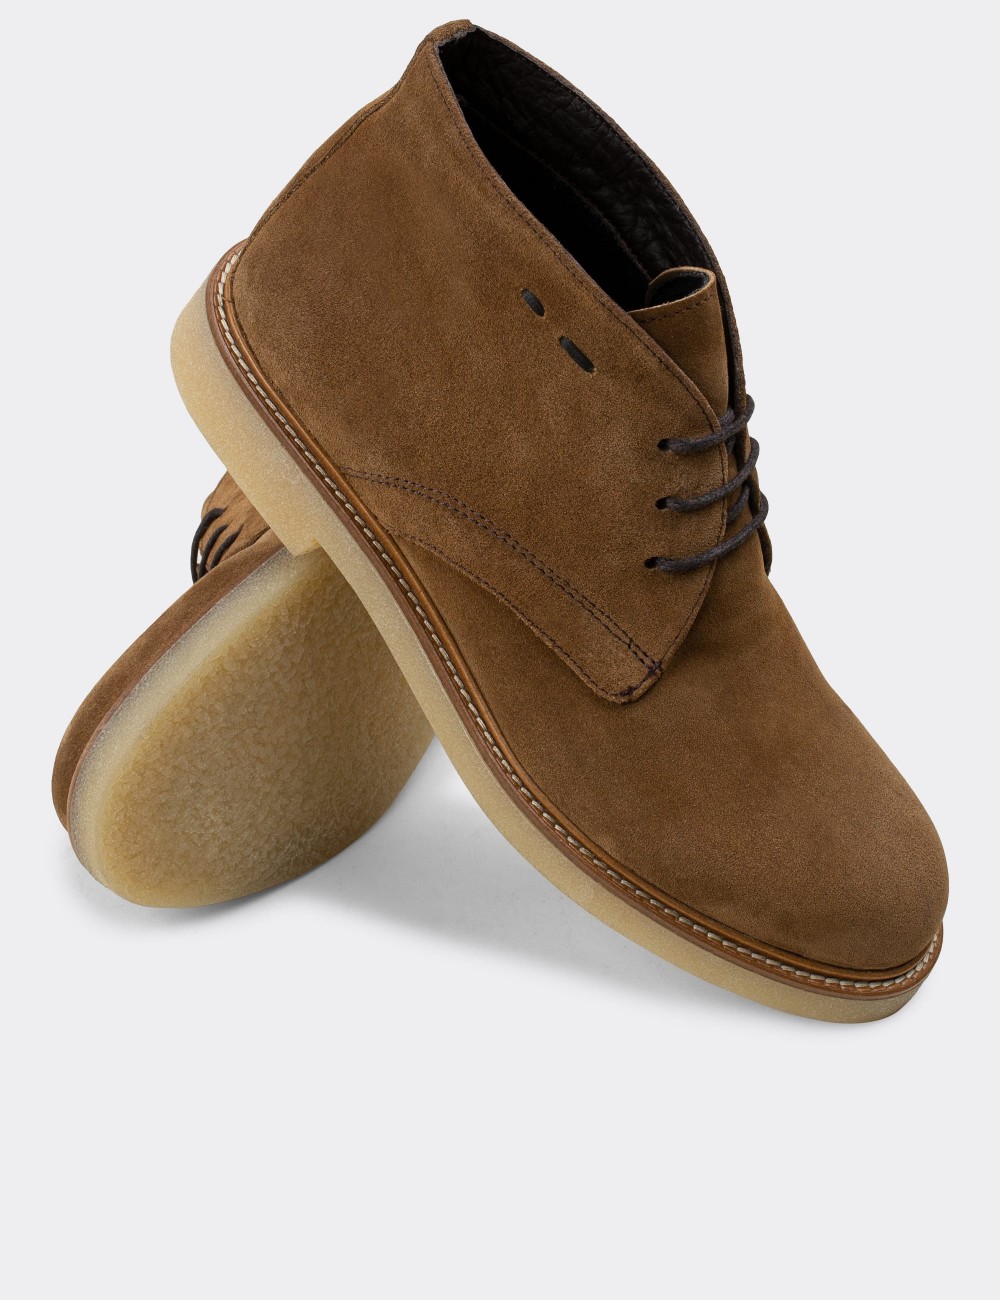 Tan Suede Leather Desert Boots - 01295MTBAC07